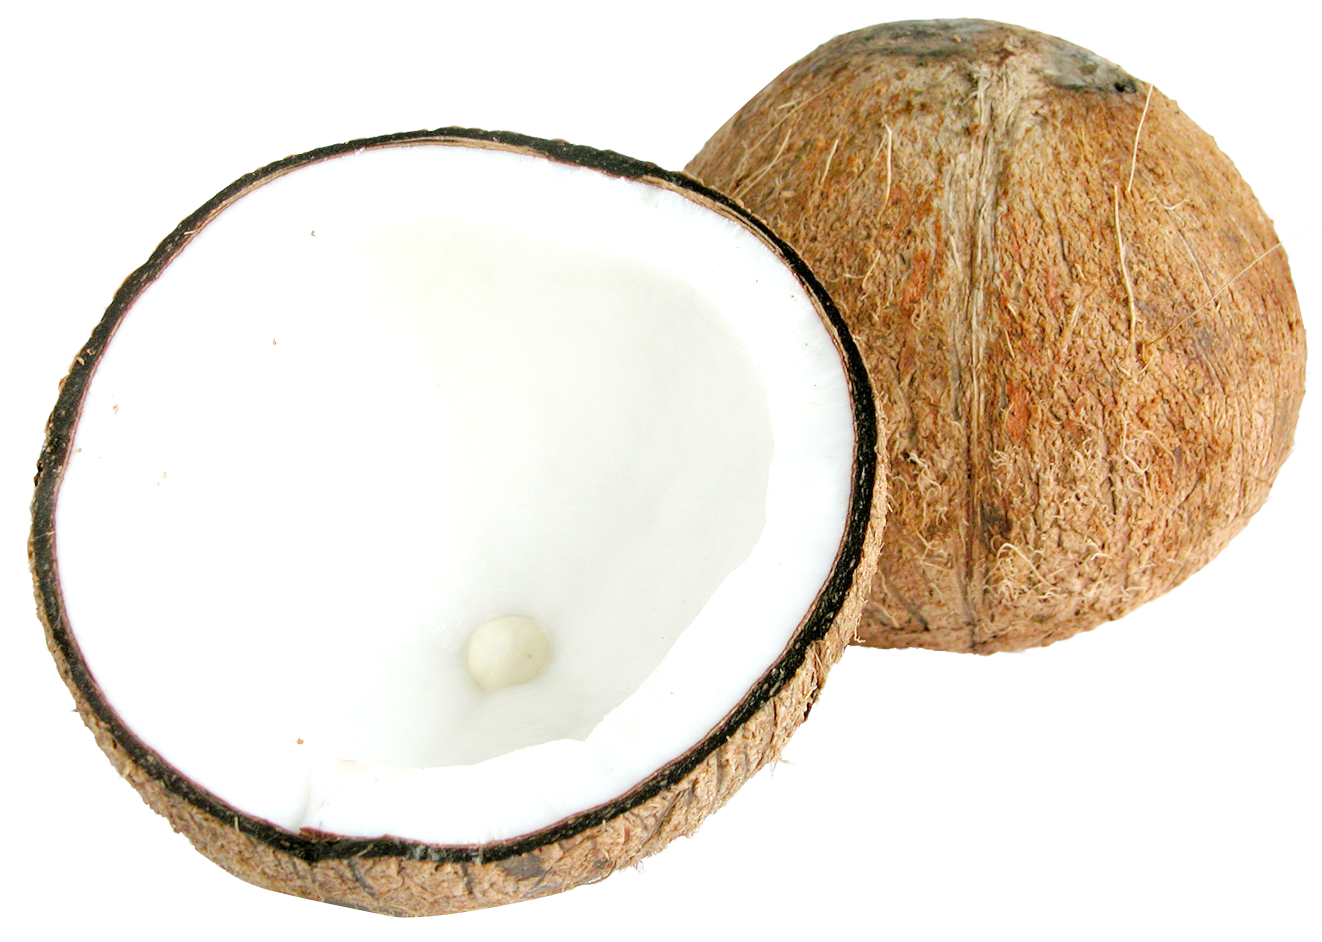 Two half coconuts png. Coconut clipart coconut bunch